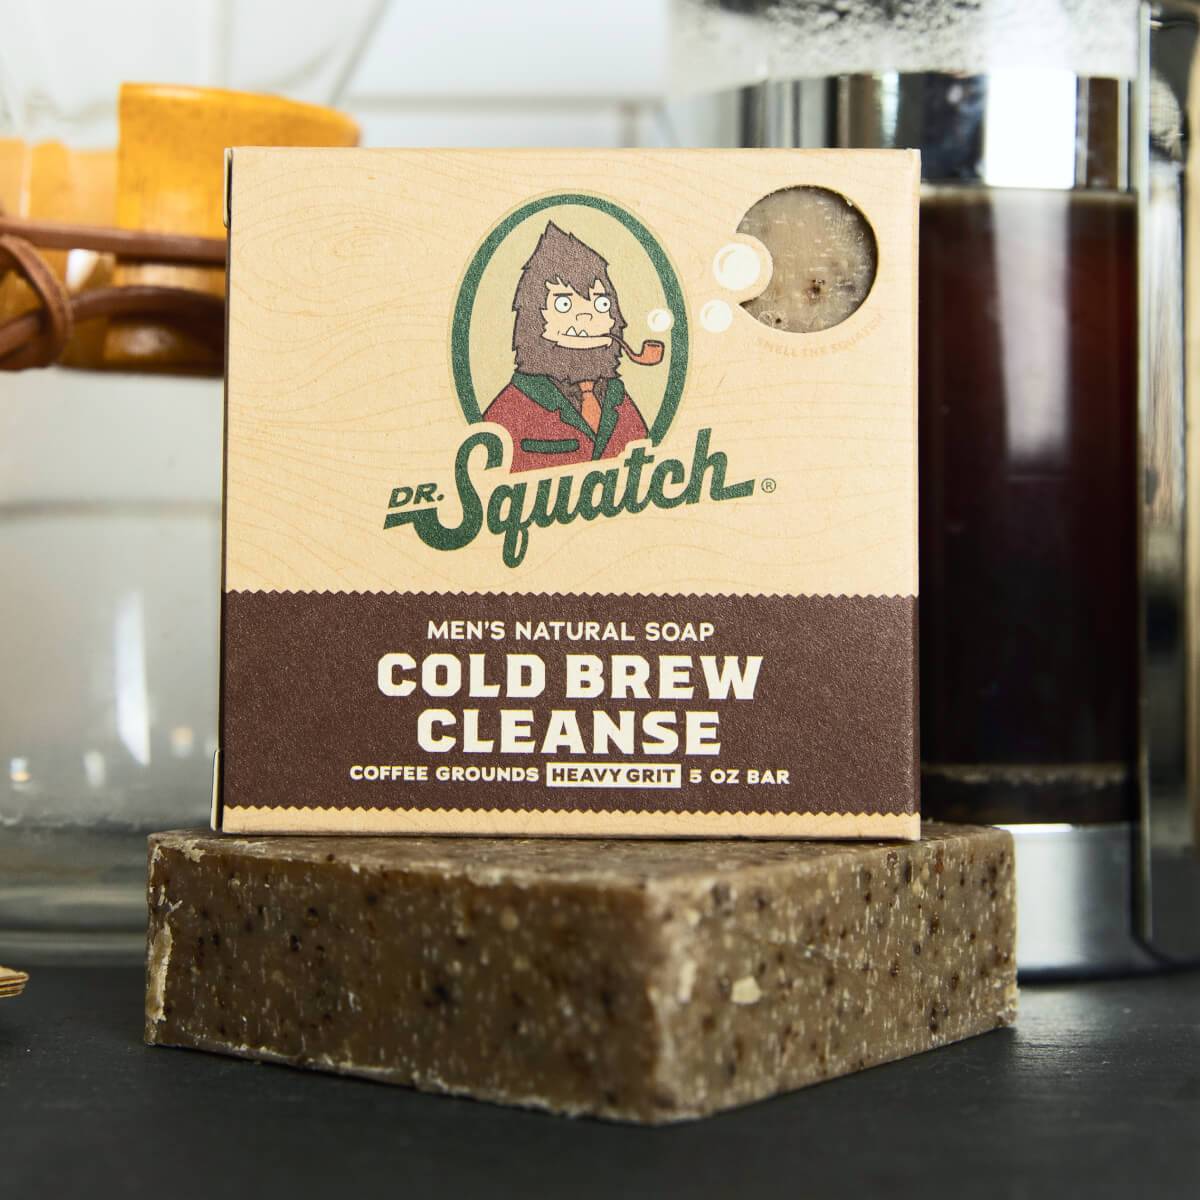 DR. SQUATCH BAR SOAP - COLD BREW CLEANSE, FREE SHIPPING